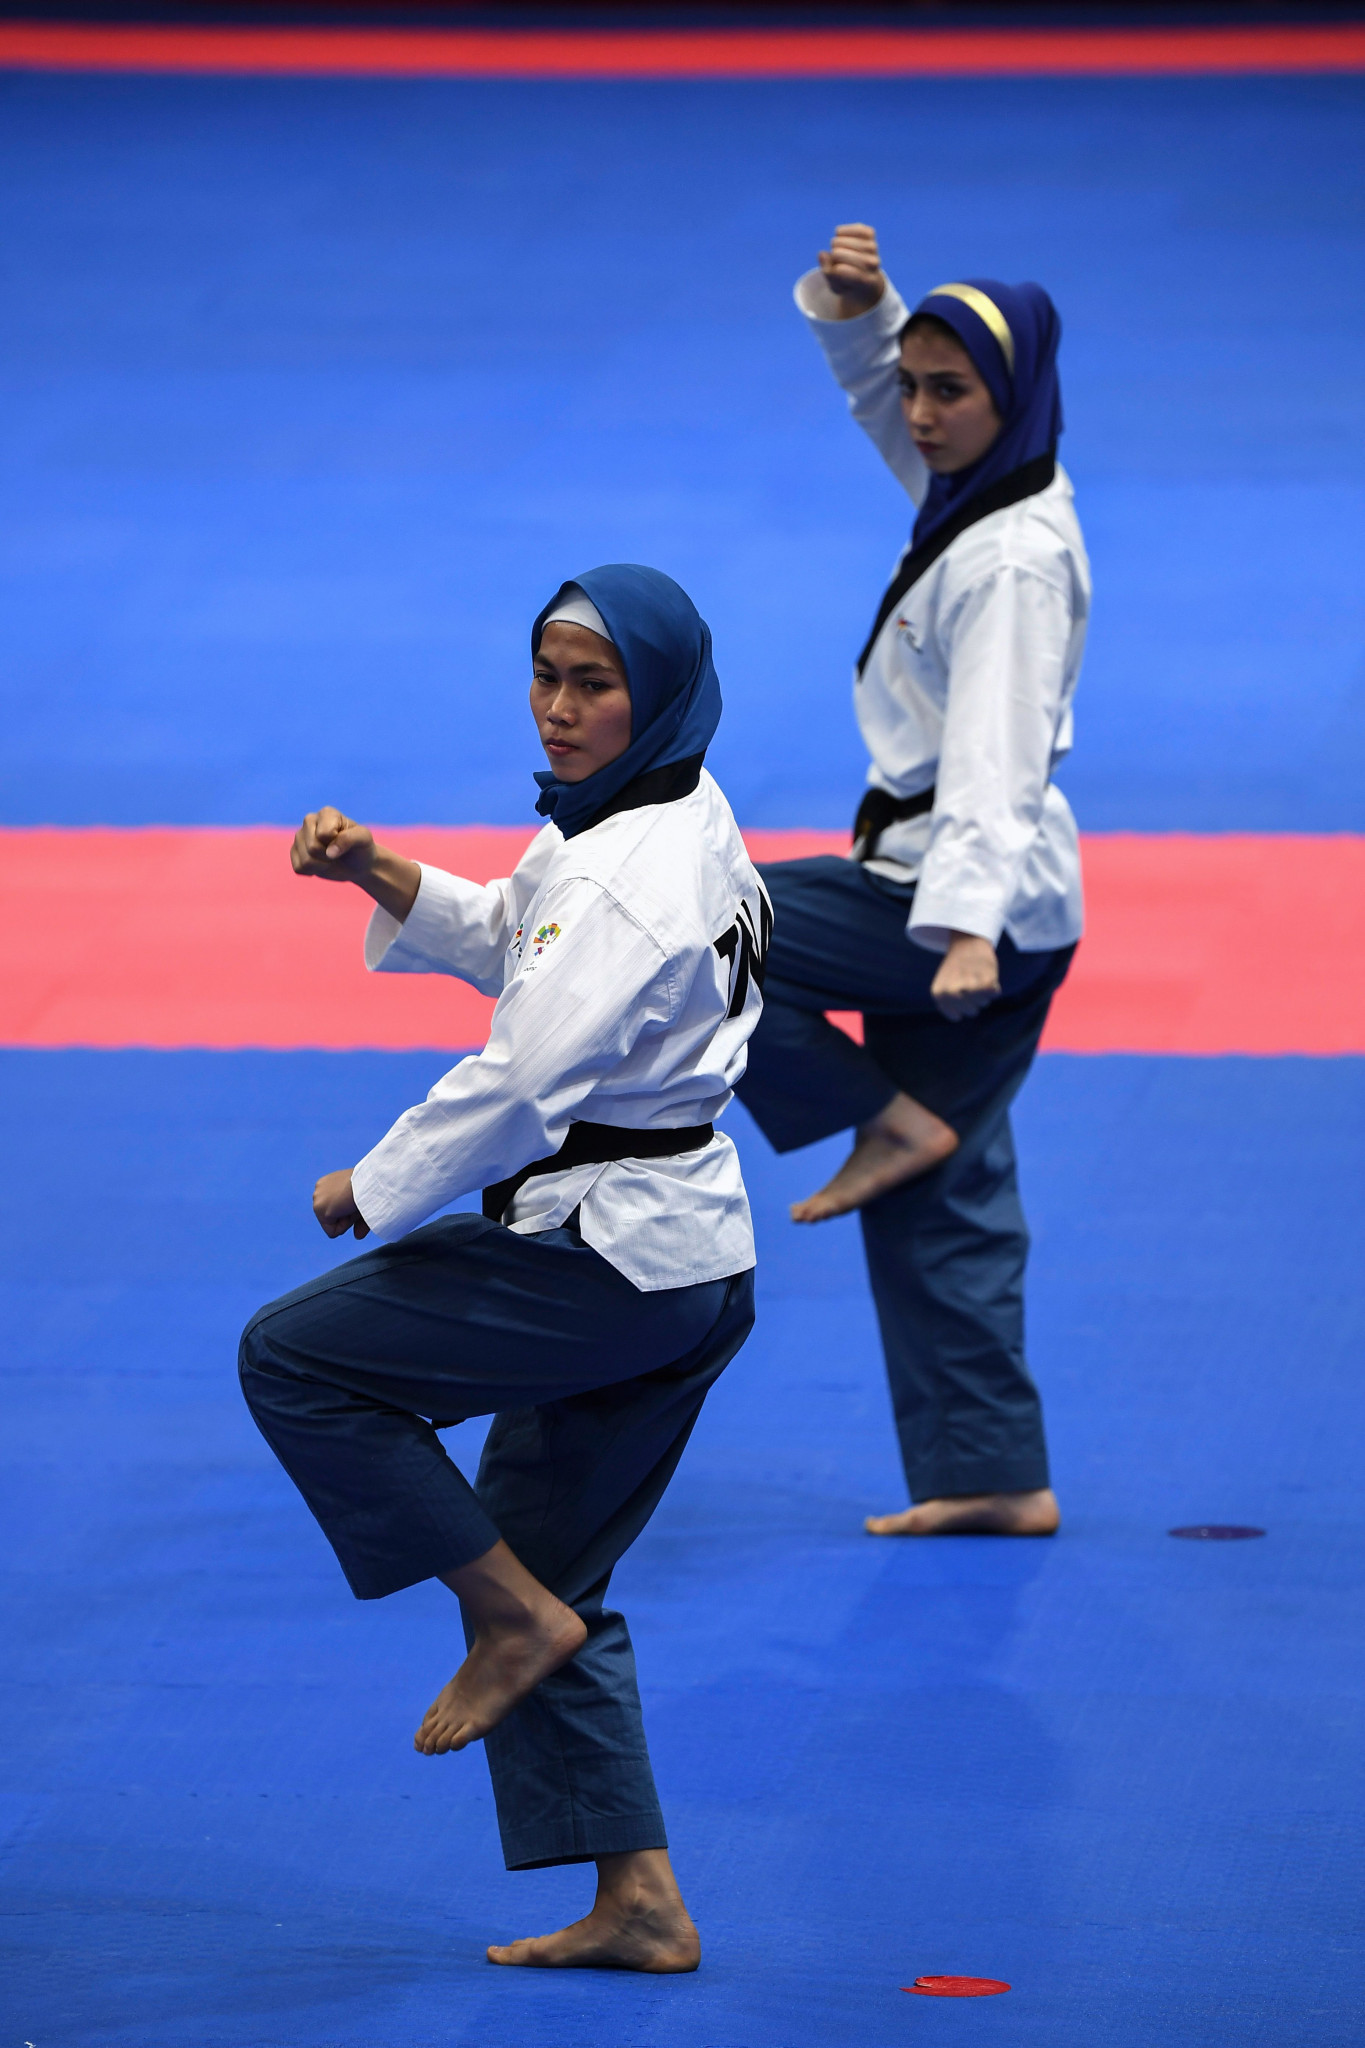 The coach appointed will work at the World Poomsae Championships ©Getty Images